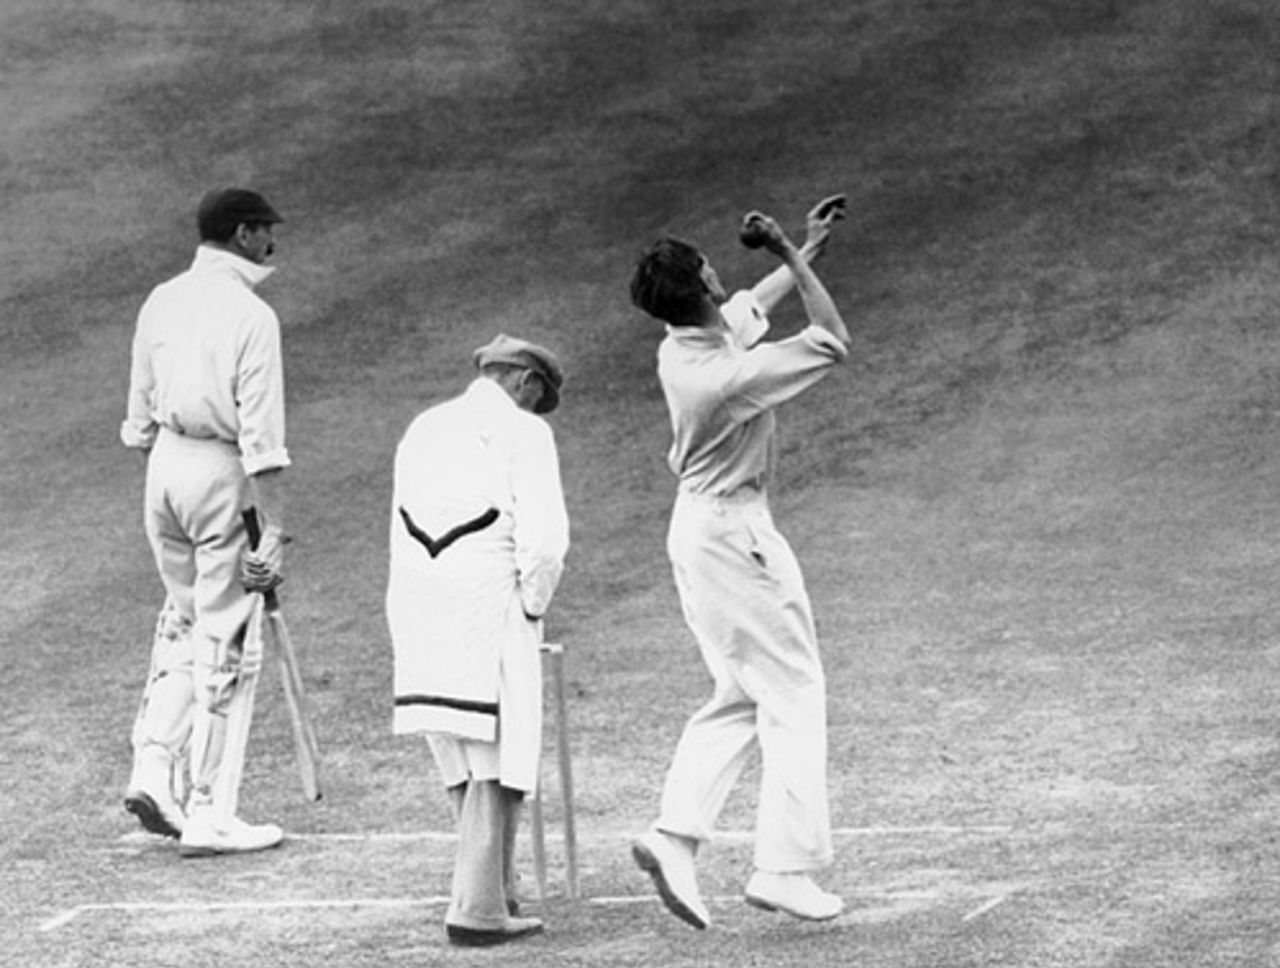 Glamorgan's Johnnie Clay in action against Surrey at The Oval, circa 1930